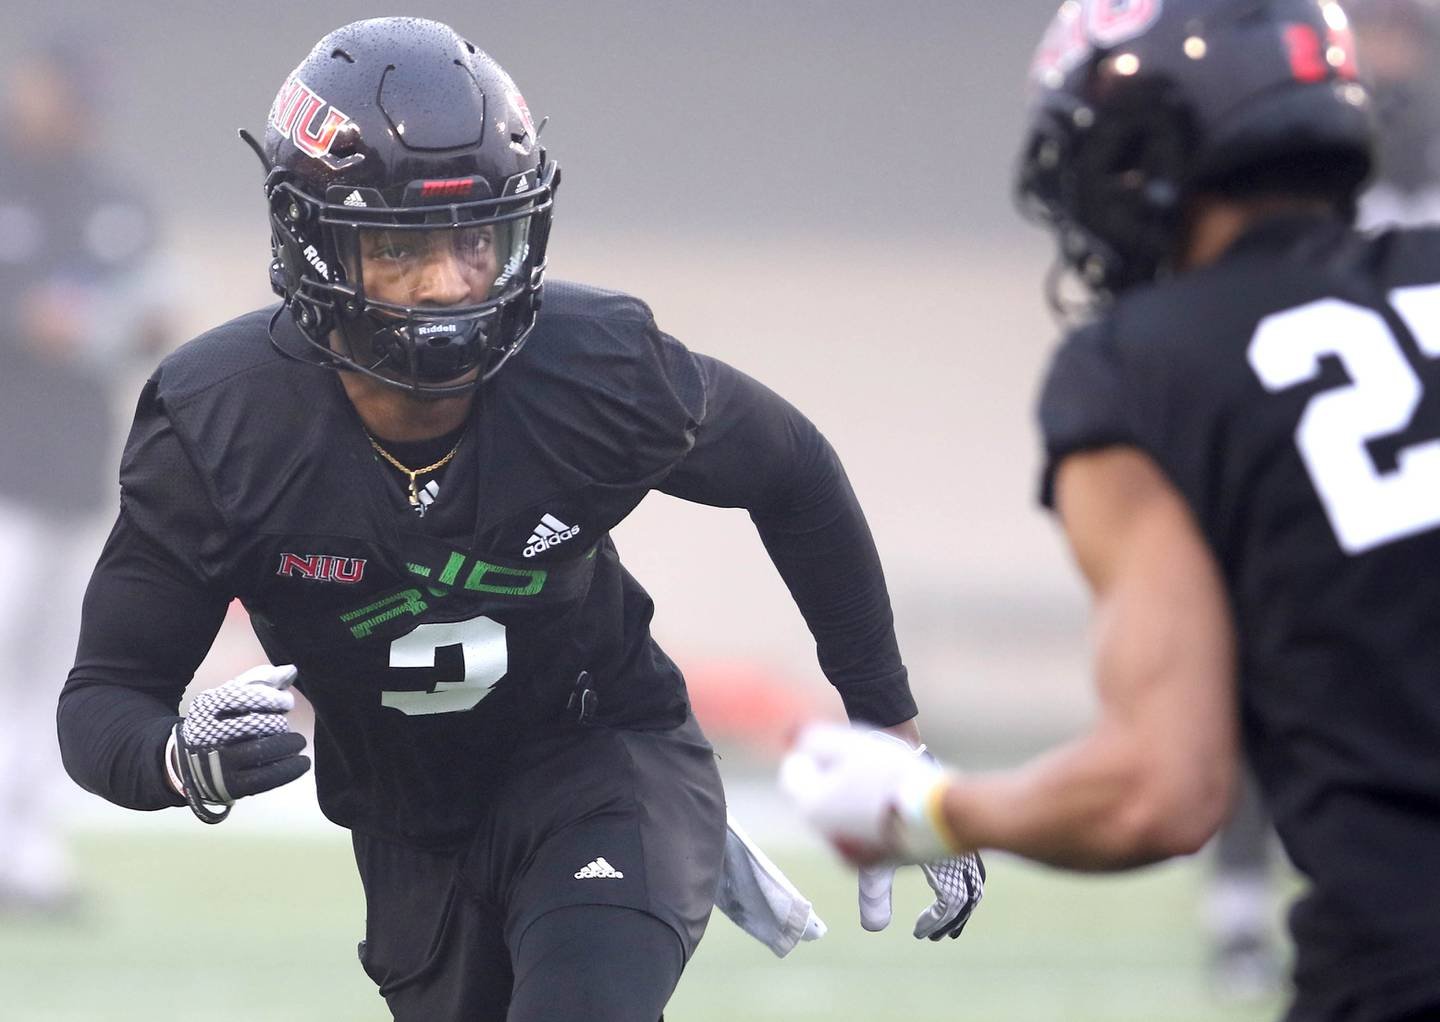 Northern Illinois University safety Devin Lafayette works on covers during spring practice Wednesday, March 23, 2022, at NIU in DeKalb.